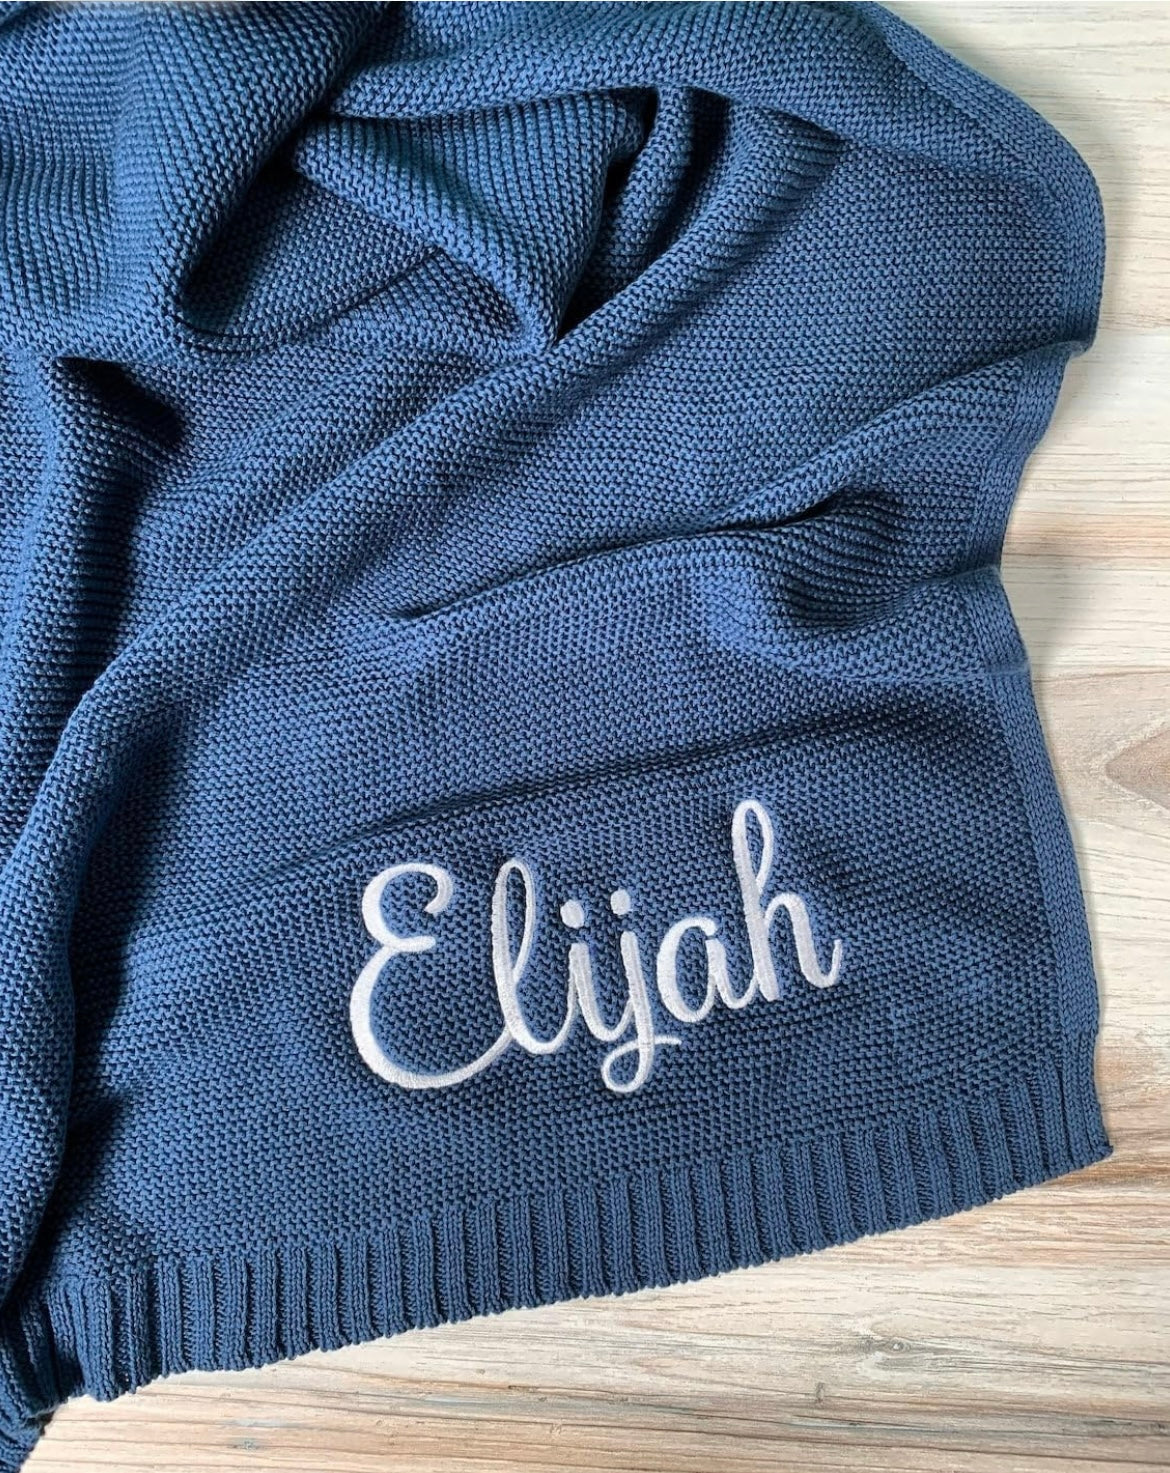 Knit Baby Blanket Personalized Extra Charge